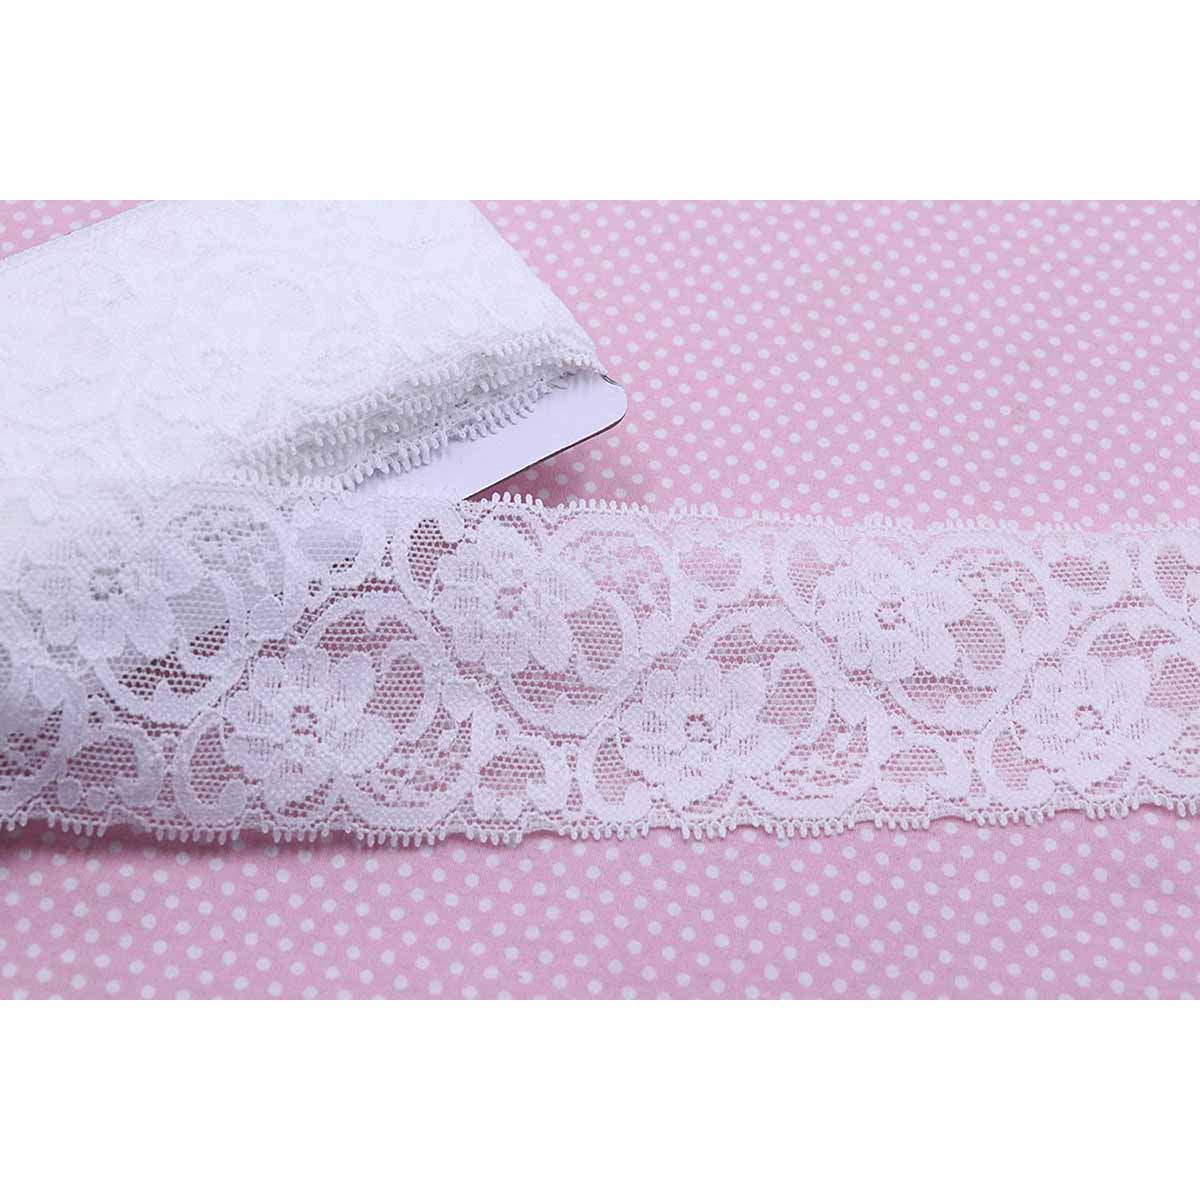 10 Yards Stretch Floral Lace Trim Ribbon 2.25″-Off White